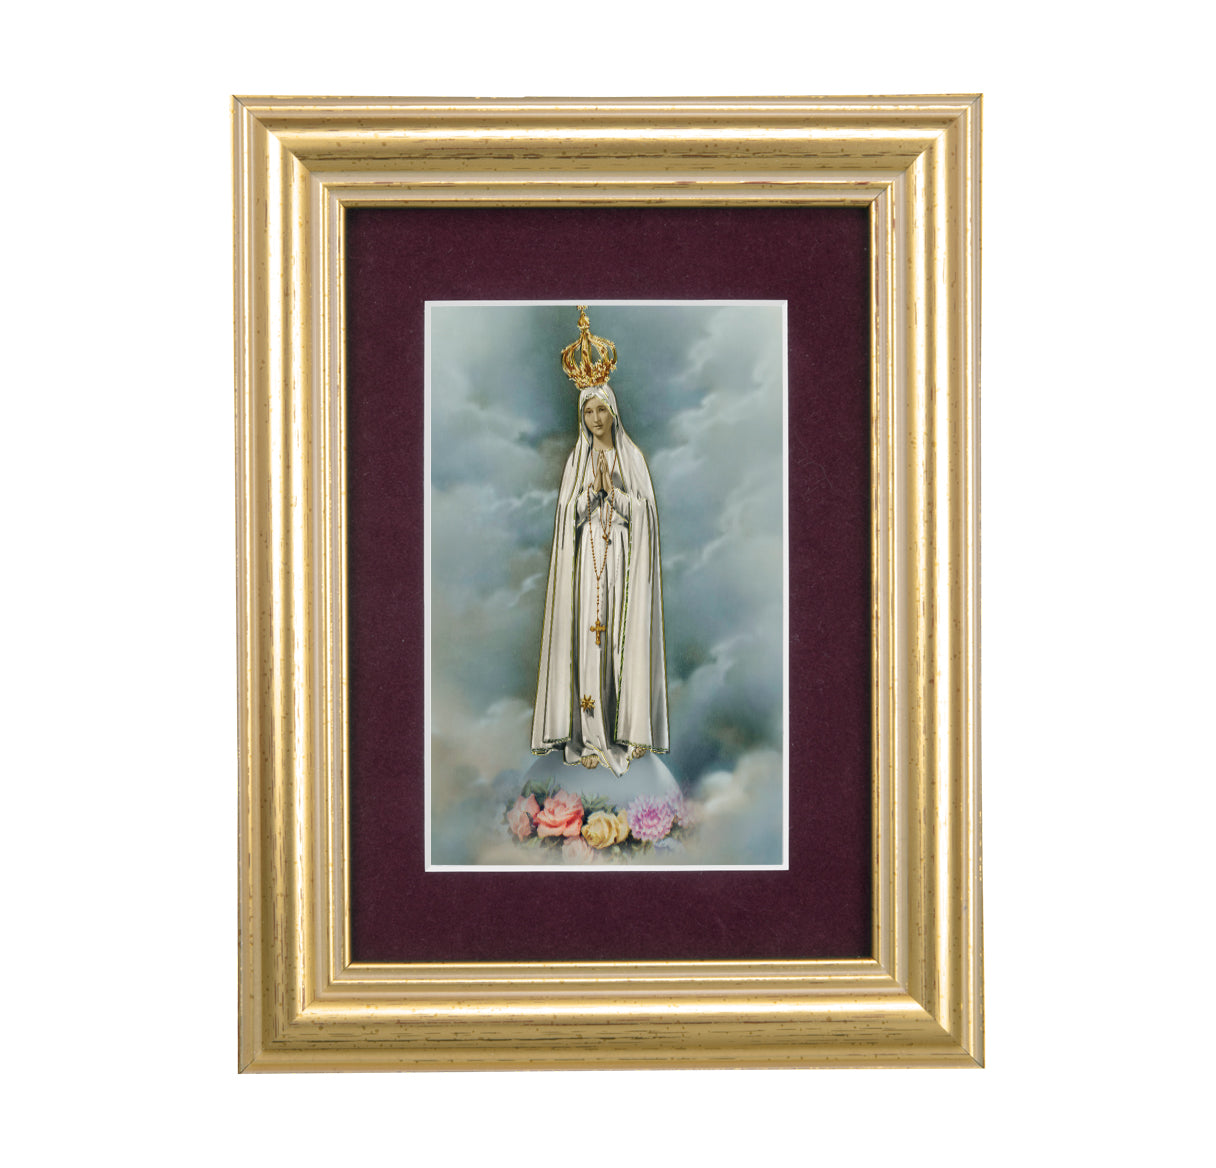 Our Lady of Fatima Framed Art with Maroon Velvet Matting